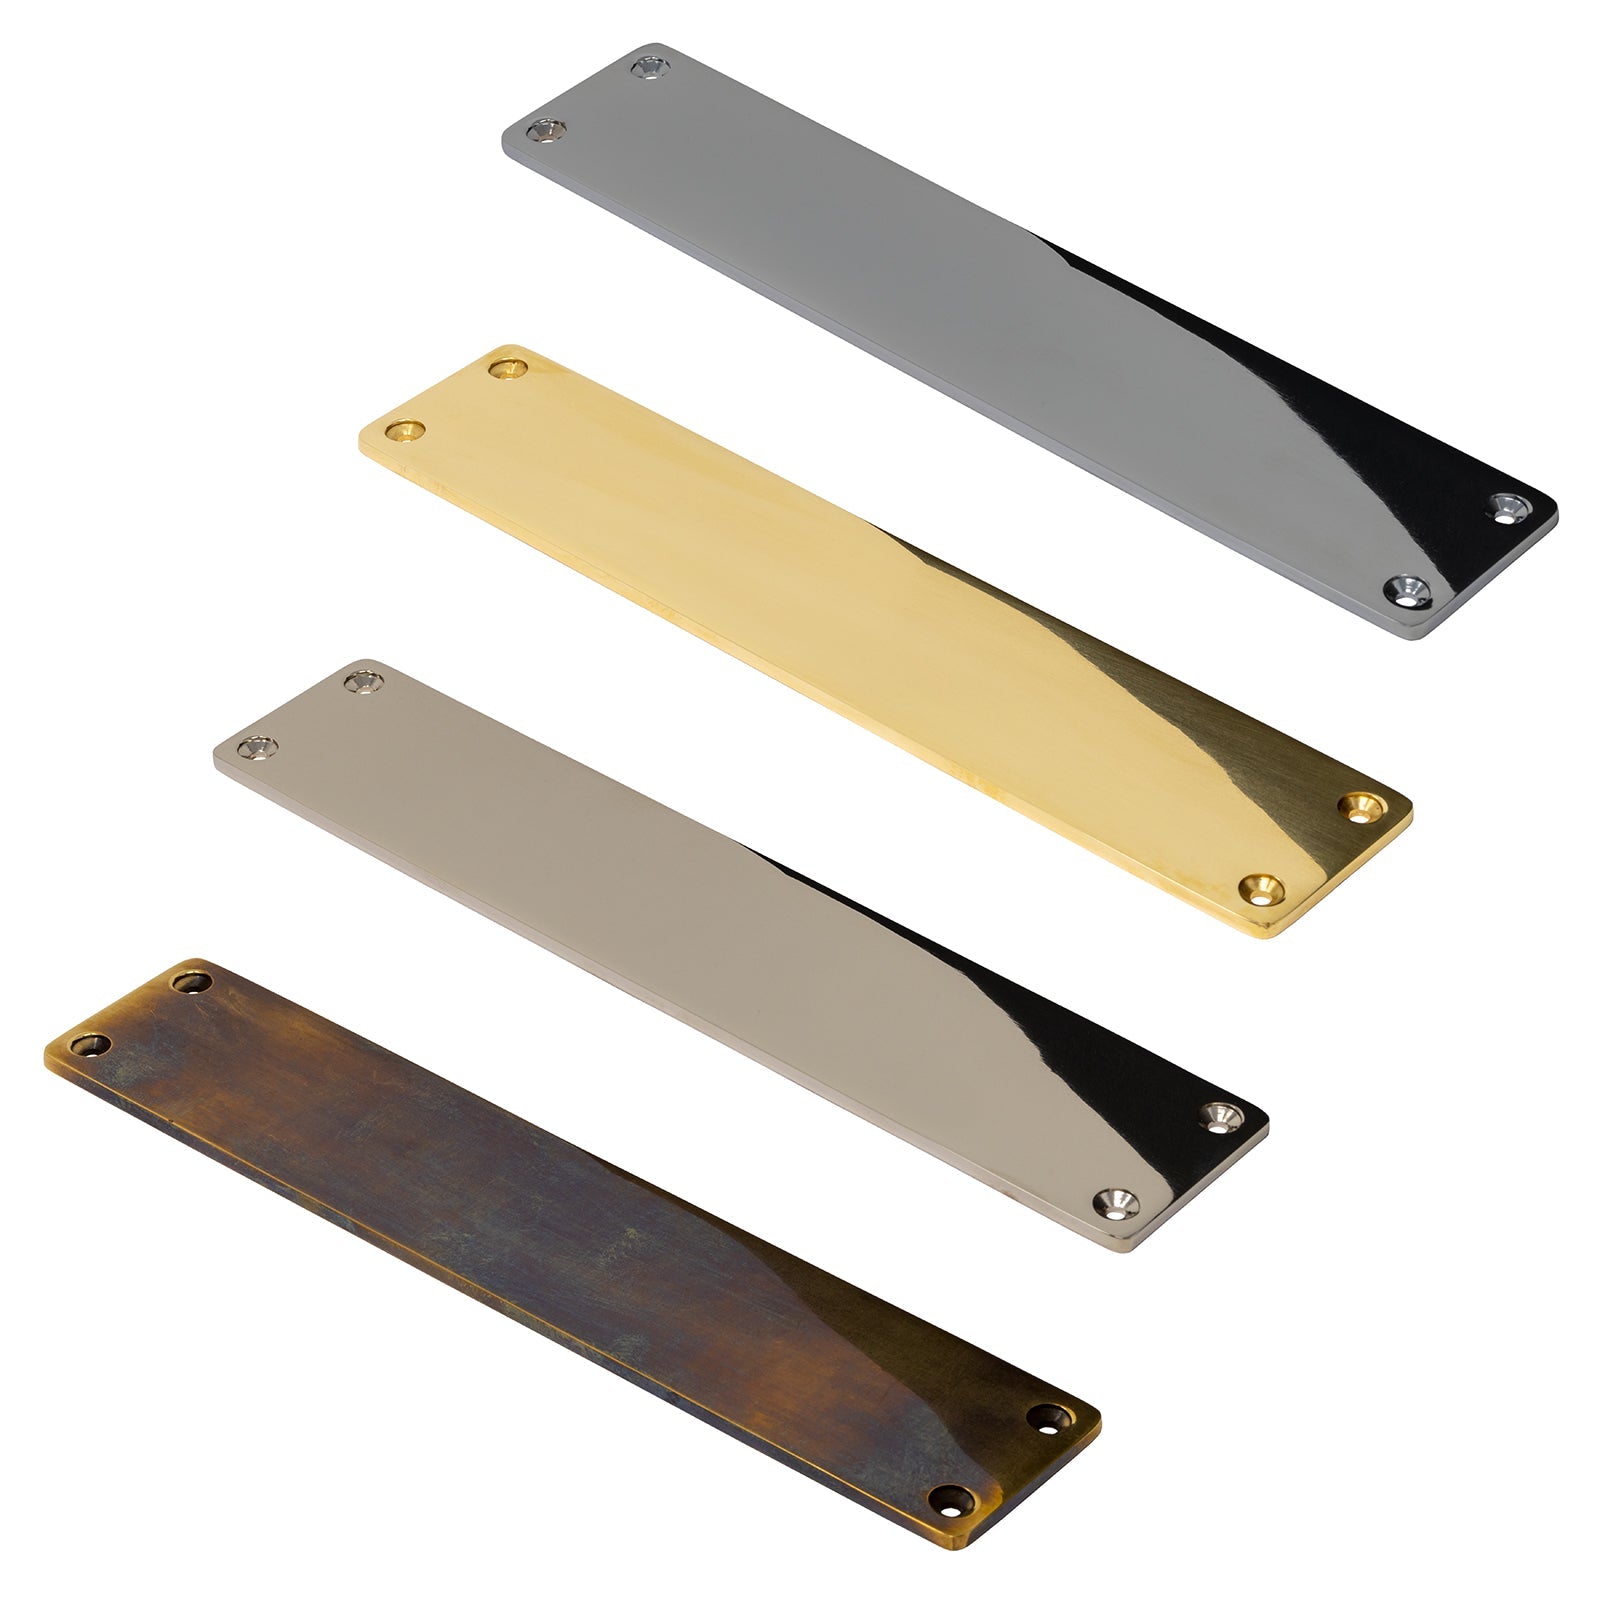 Door plates in four finishes